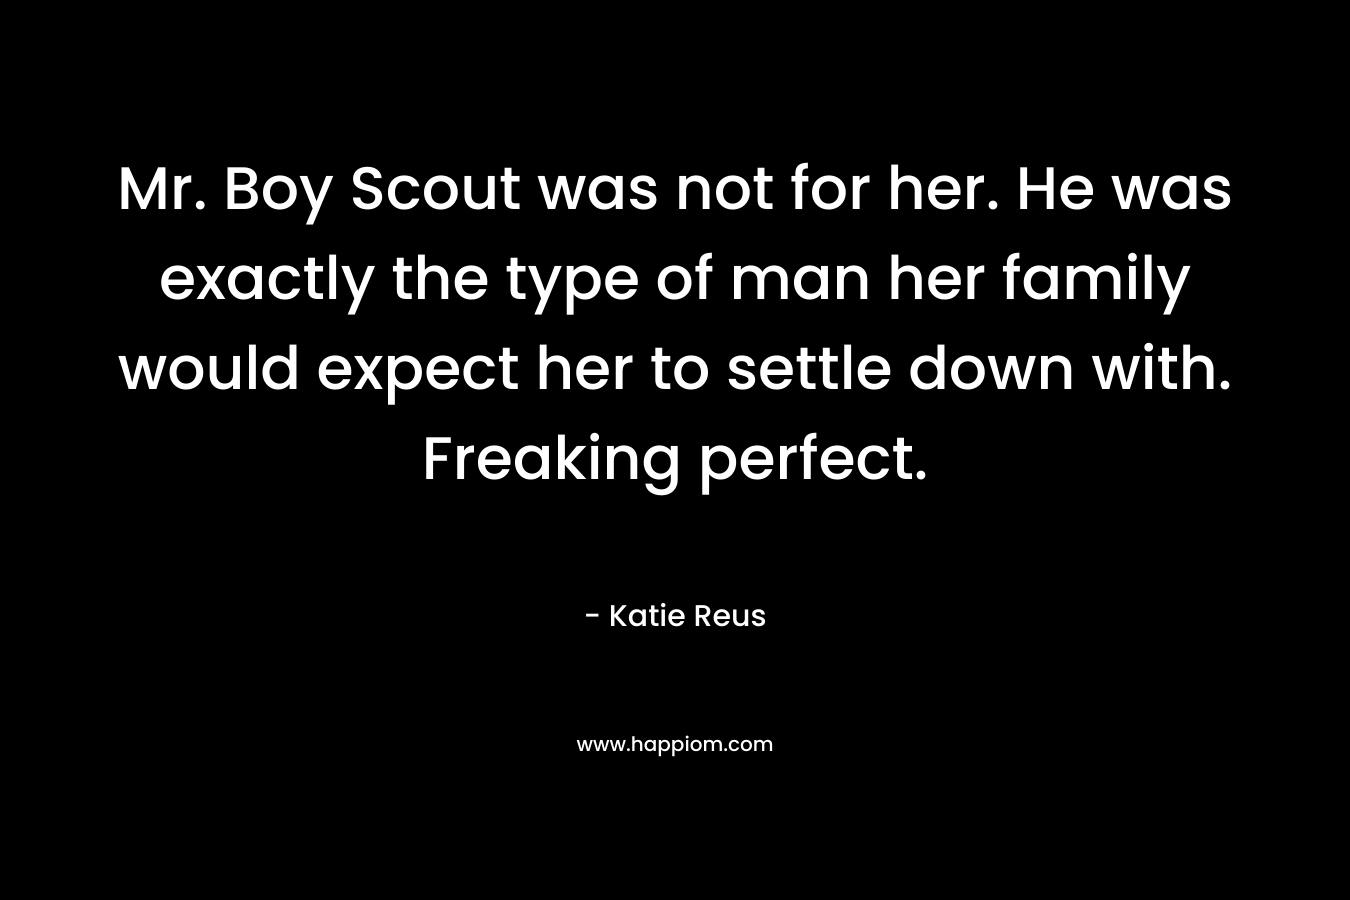 Mr. Boy Scout was not for her. He was exactly the type of man her family would expect her to settle down with. Freaking perfect. – Katie Reus